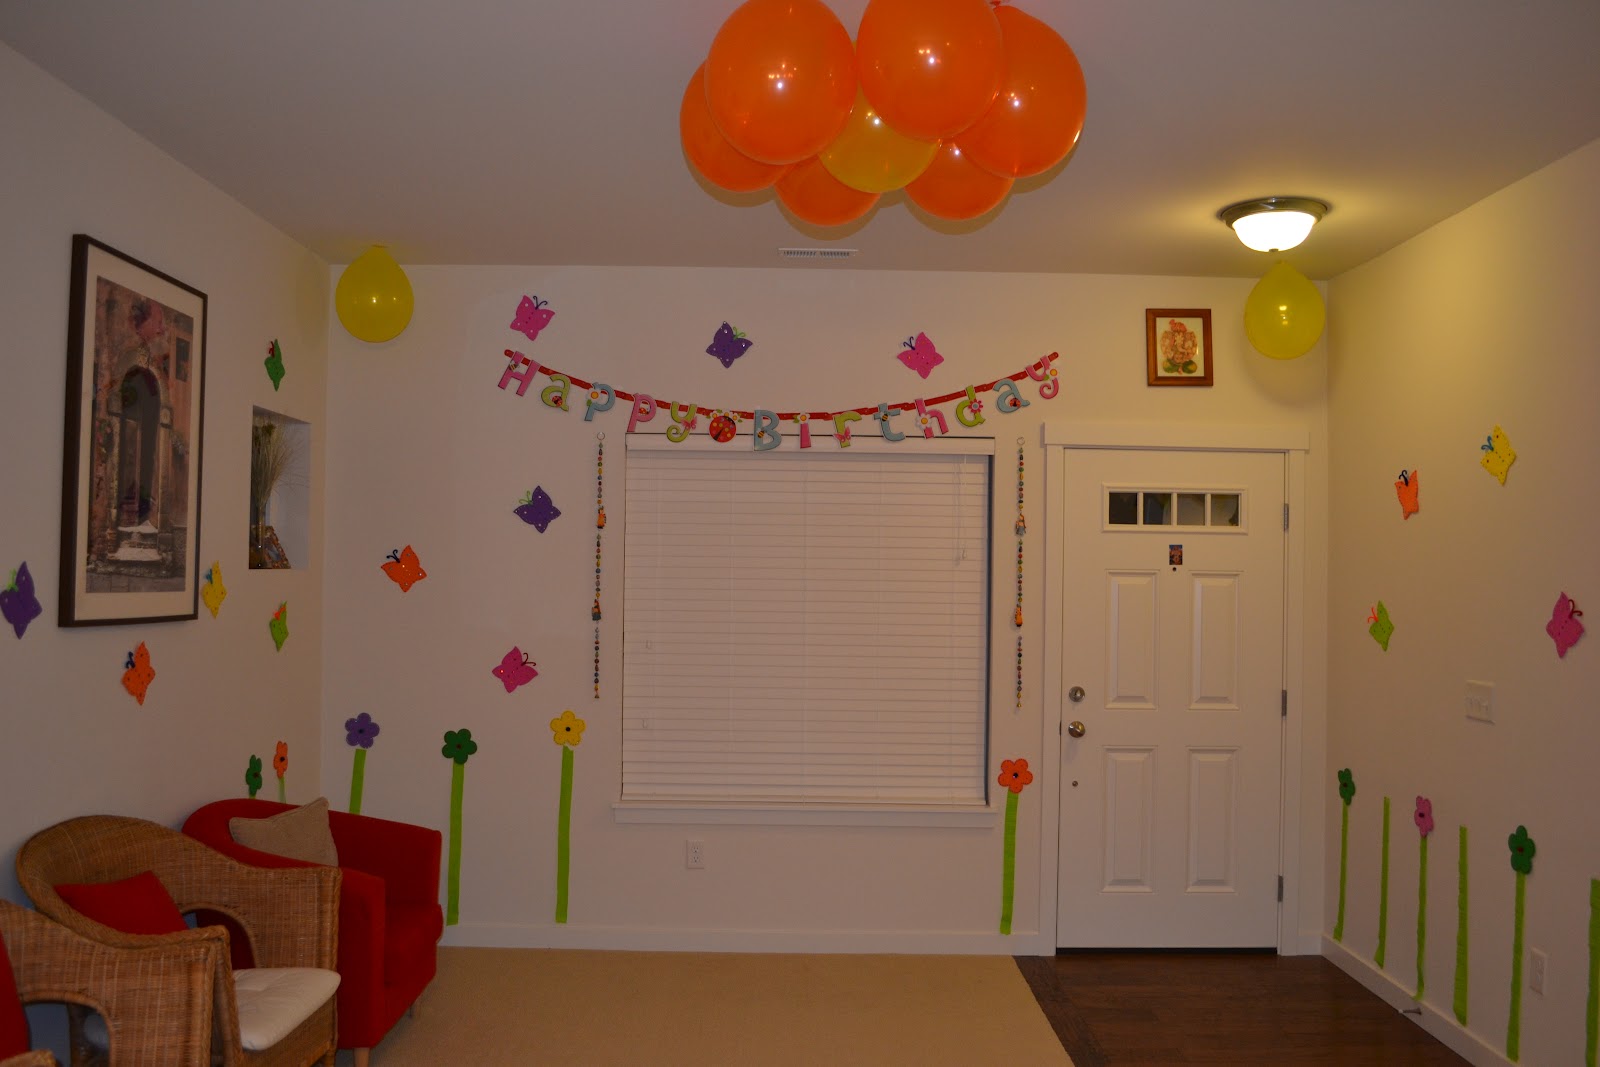 To Decorate A Room For Birthday Party, Things To Decorate Room For Birthday